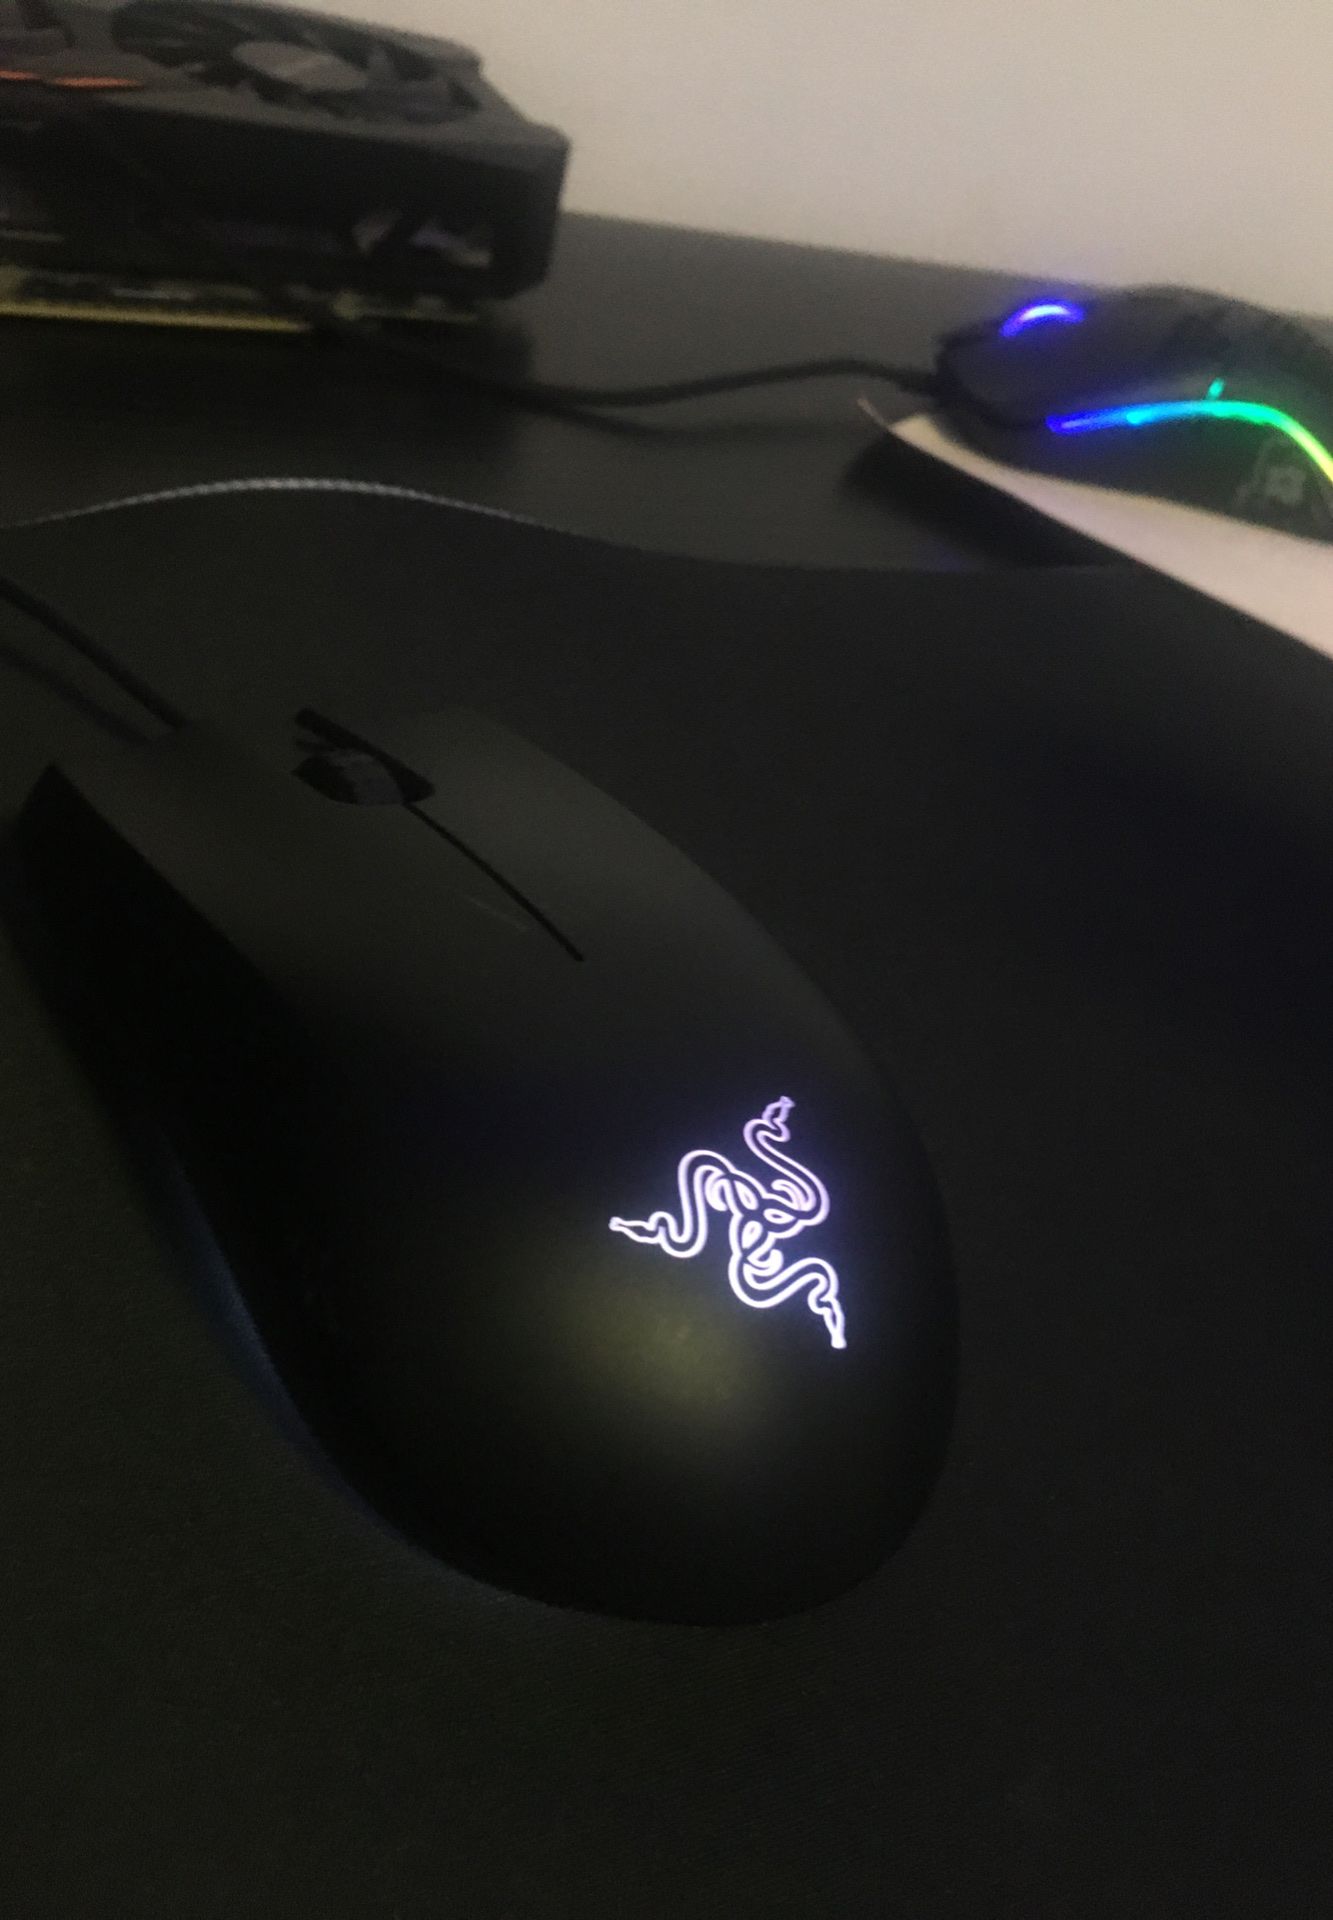 Razer gaming mouse ABYSSUS ESSENTIAL